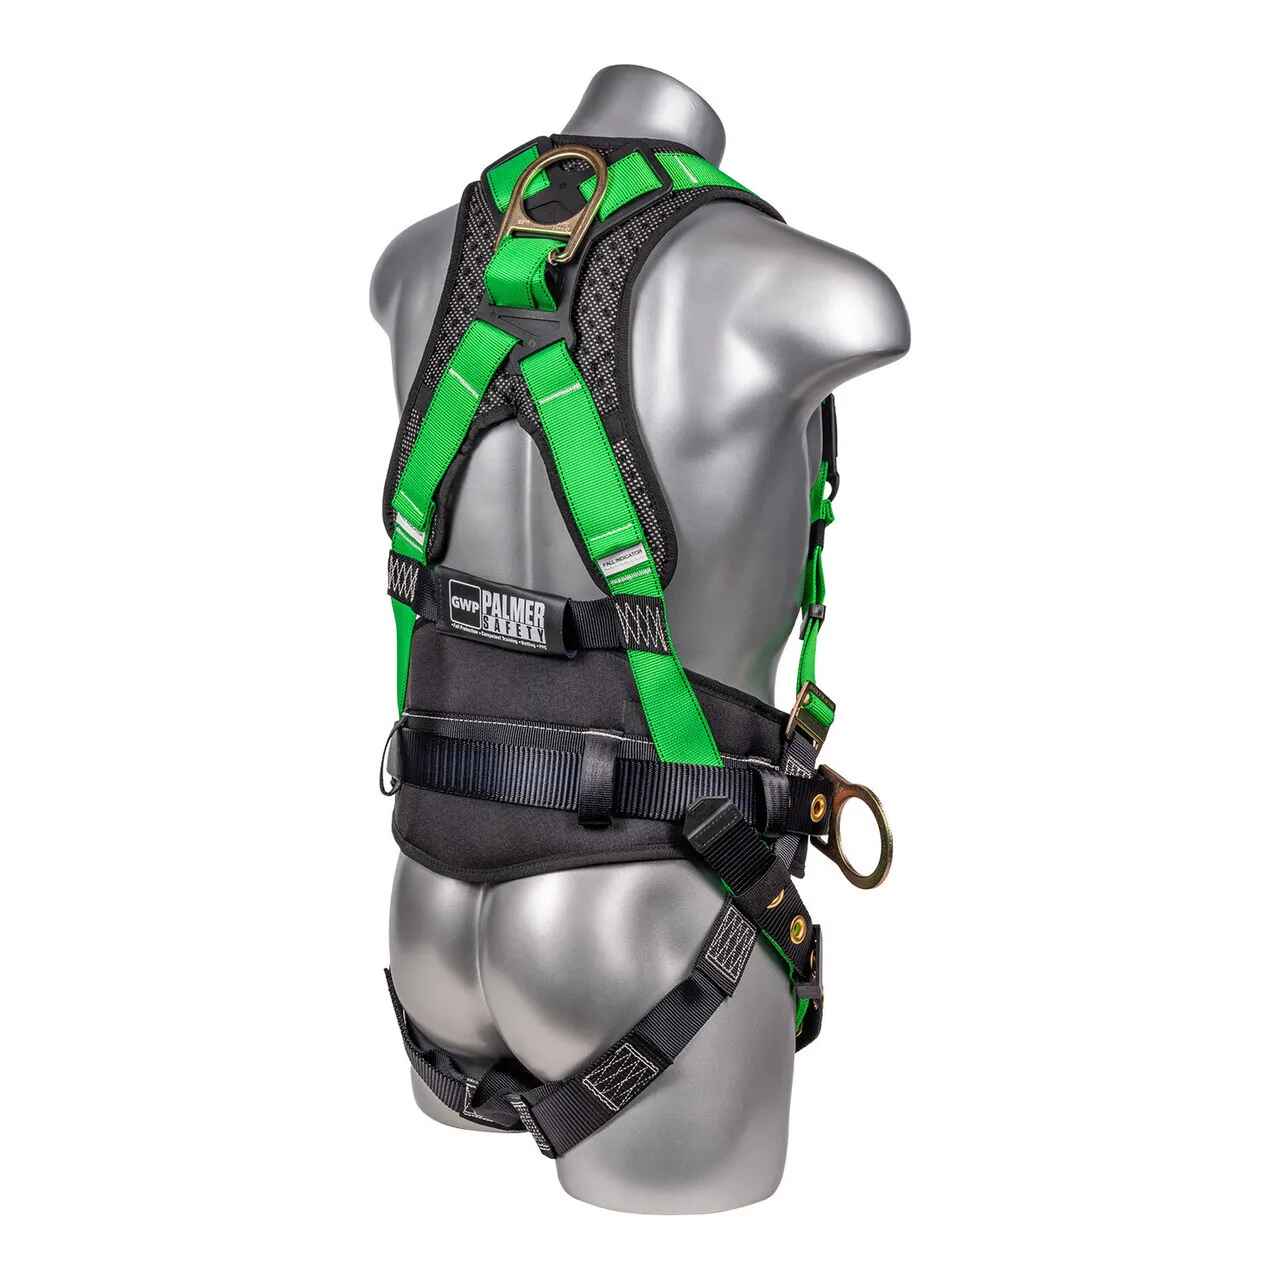 ATERET Fall Protection Full Body point Harness, Padded Back Support,  Quick-Connect Buckle, Grommet Legs, Back＆Side D-Rings, OSHA ANSI In 並行輸入品 